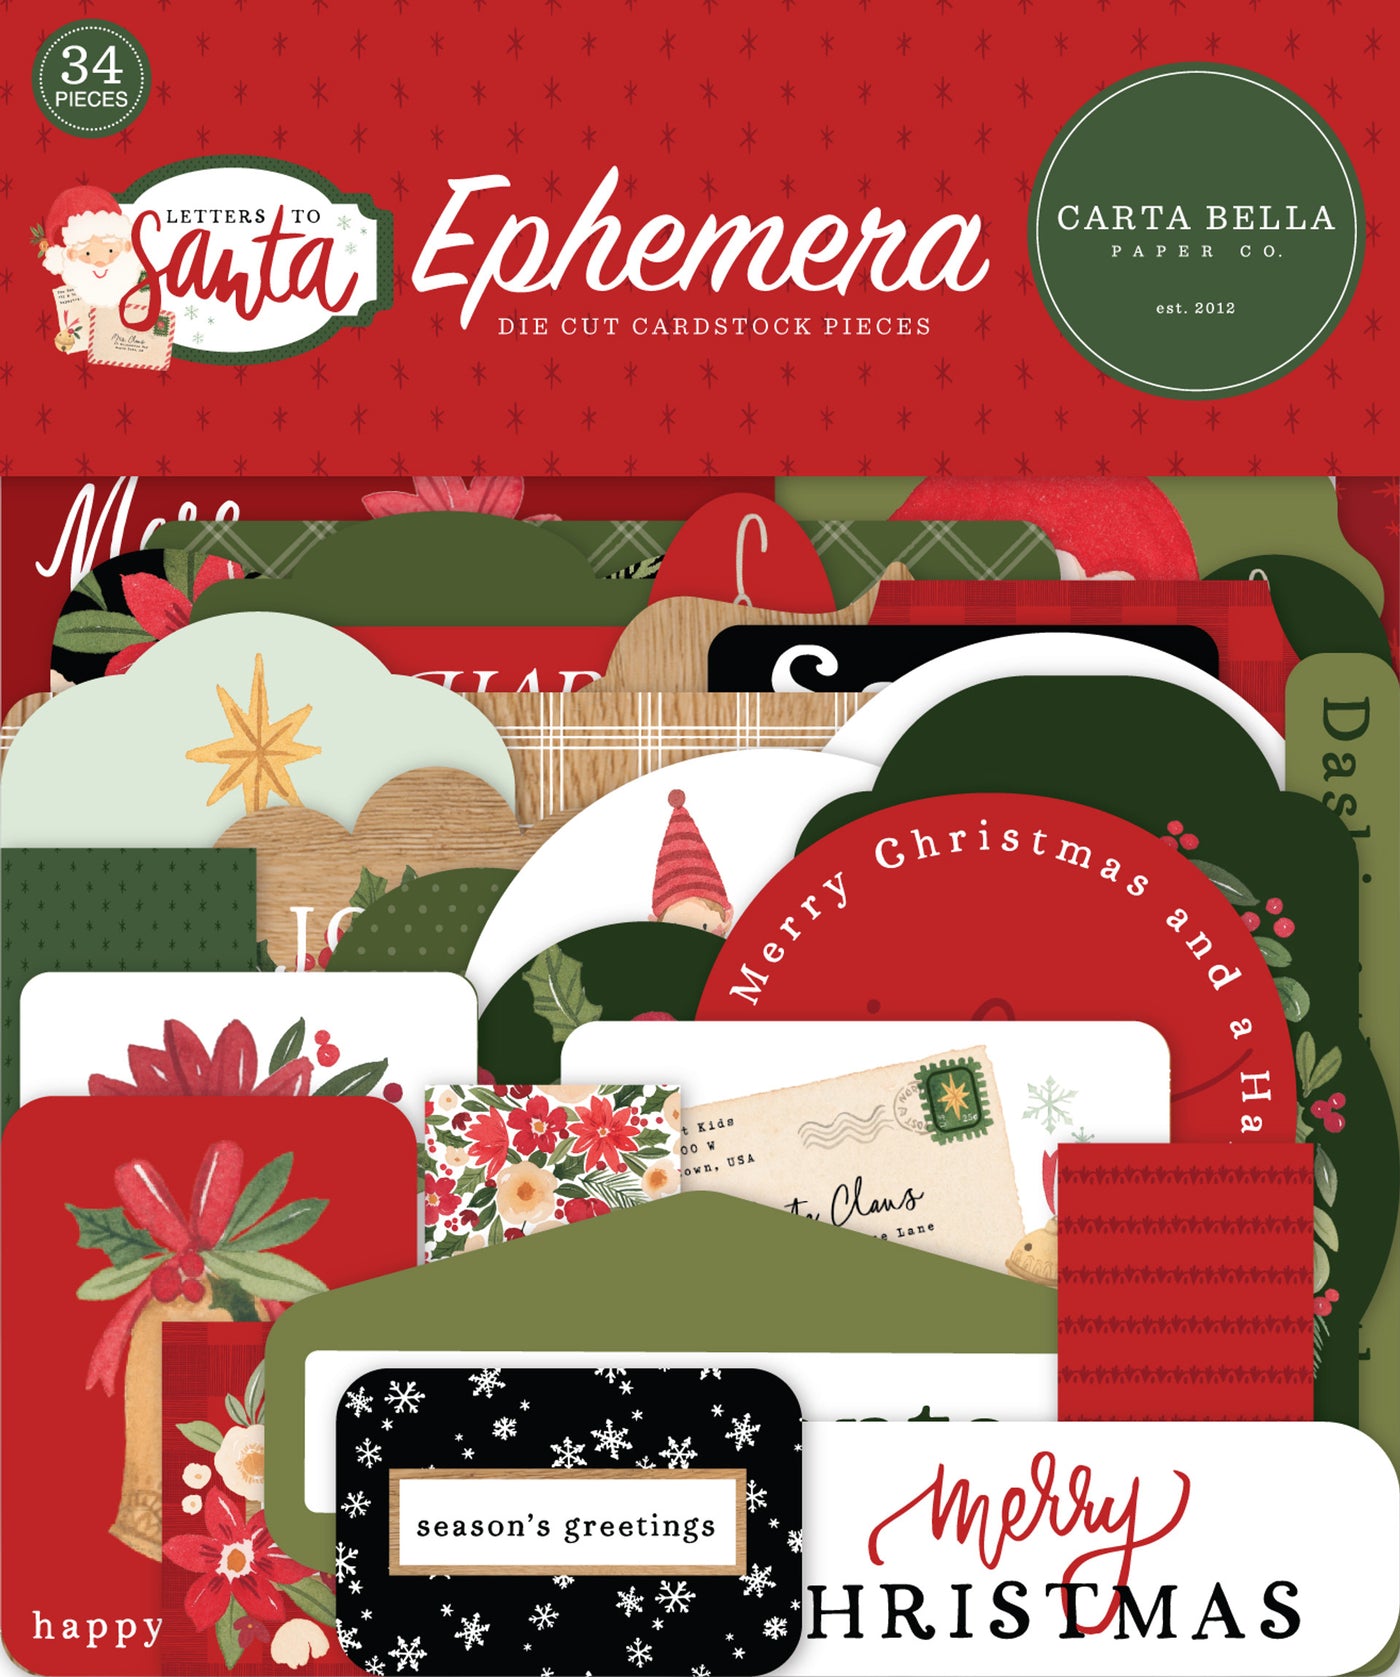 Letters To Santa Ephemera Die Cut Cardstock Pack includes 34 different die-cut shapes ready to embellish any project.